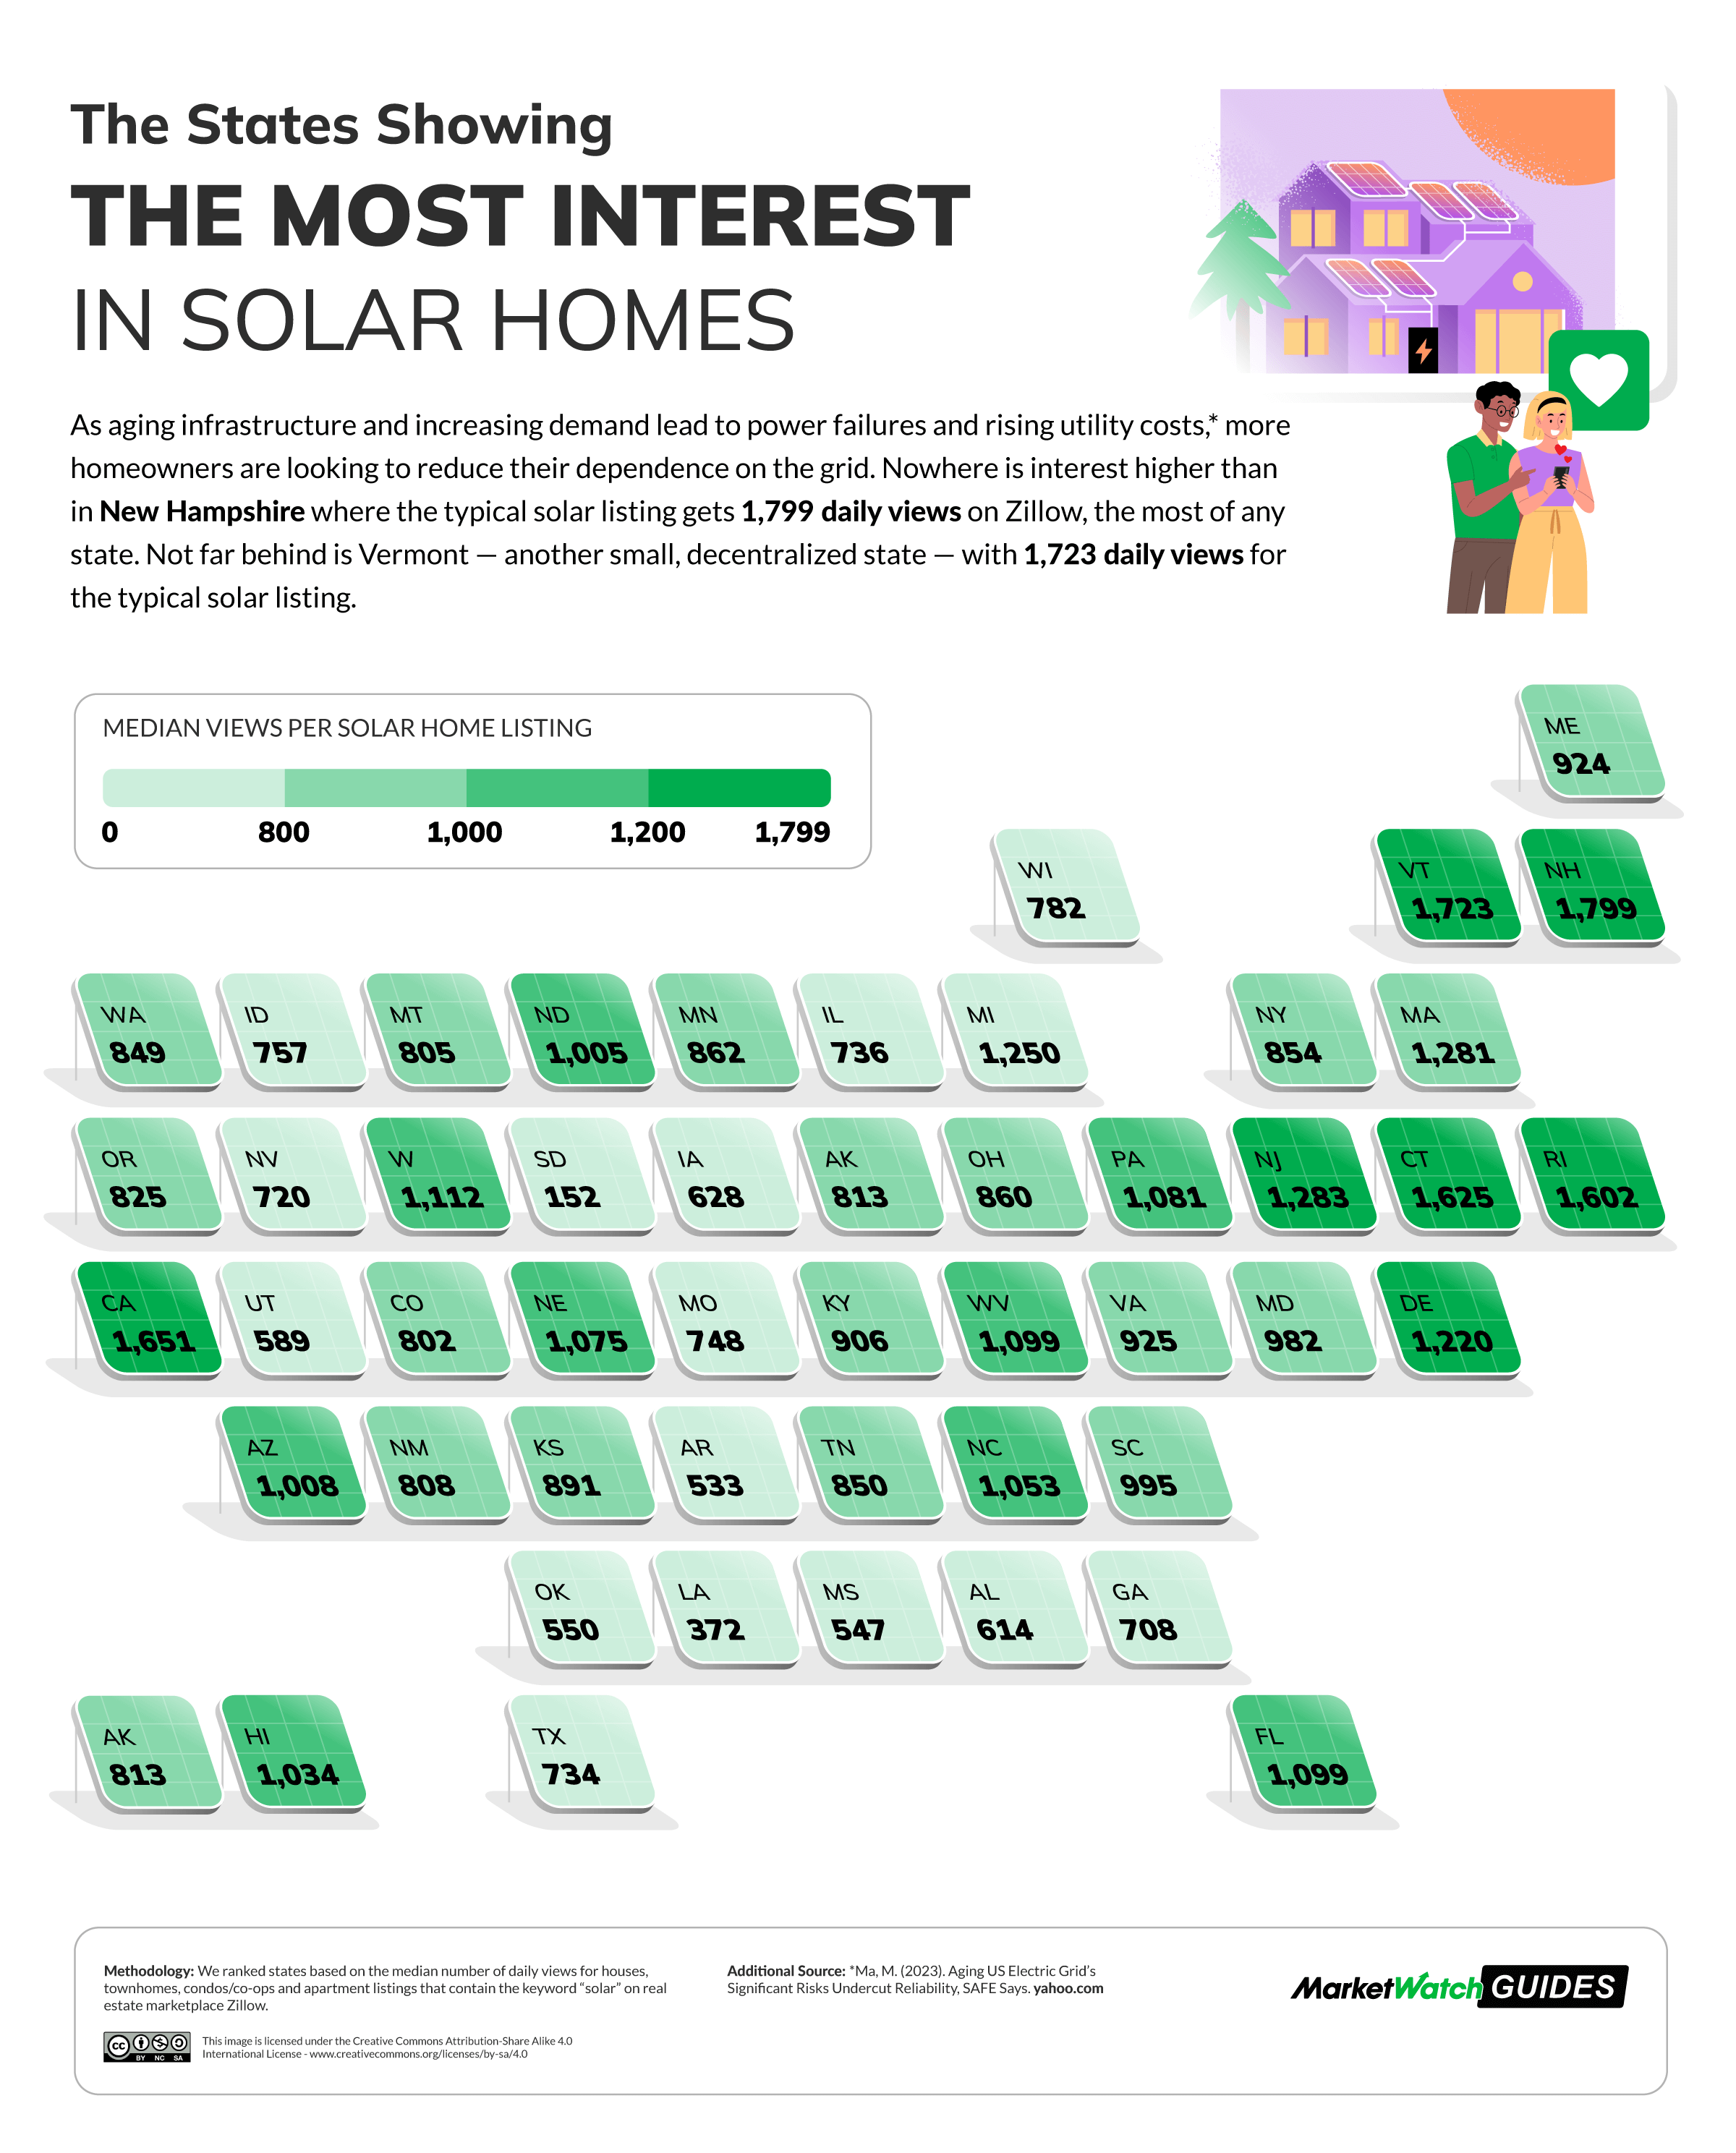 The States Showing The Most Interest in Solar Homes